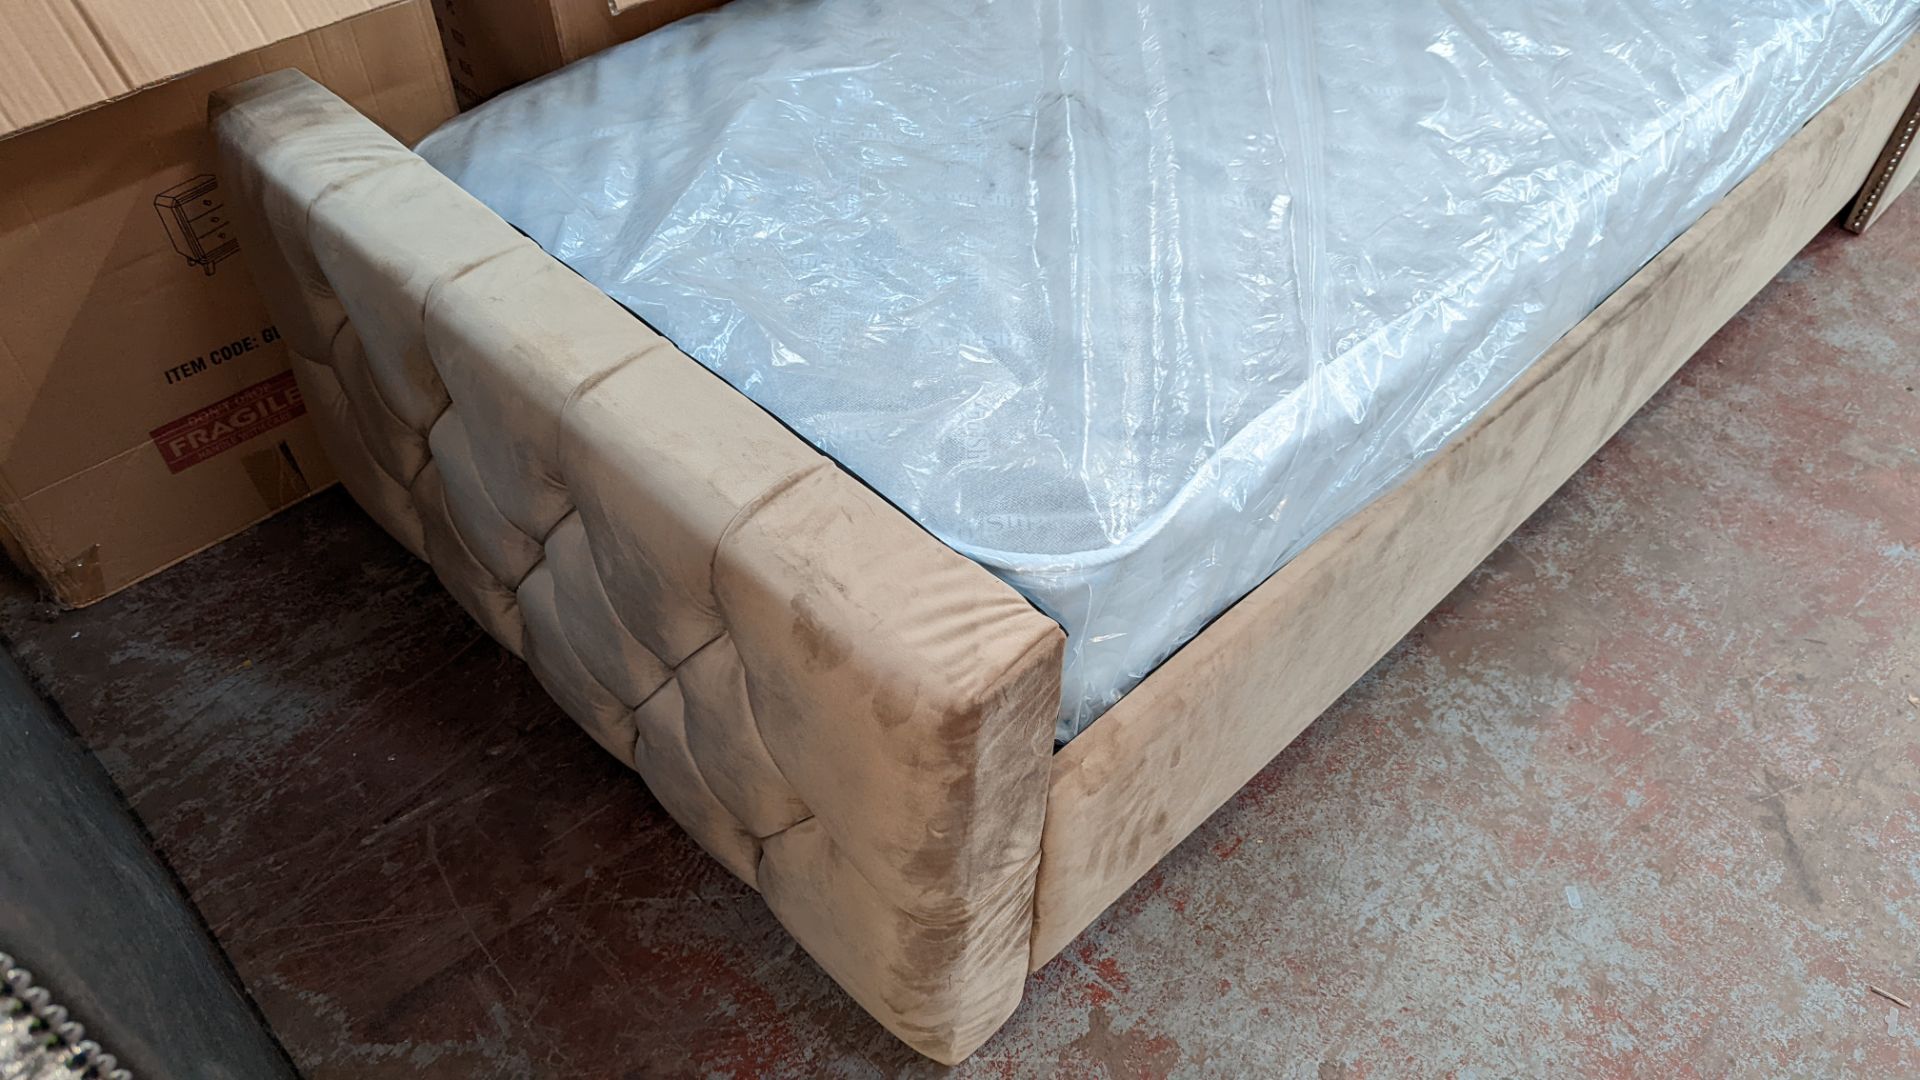 Single bed in suede/suede like fabric including mattress. Mattress dimensions 90cm x 192cm. Bed ma - Image 4 of 7